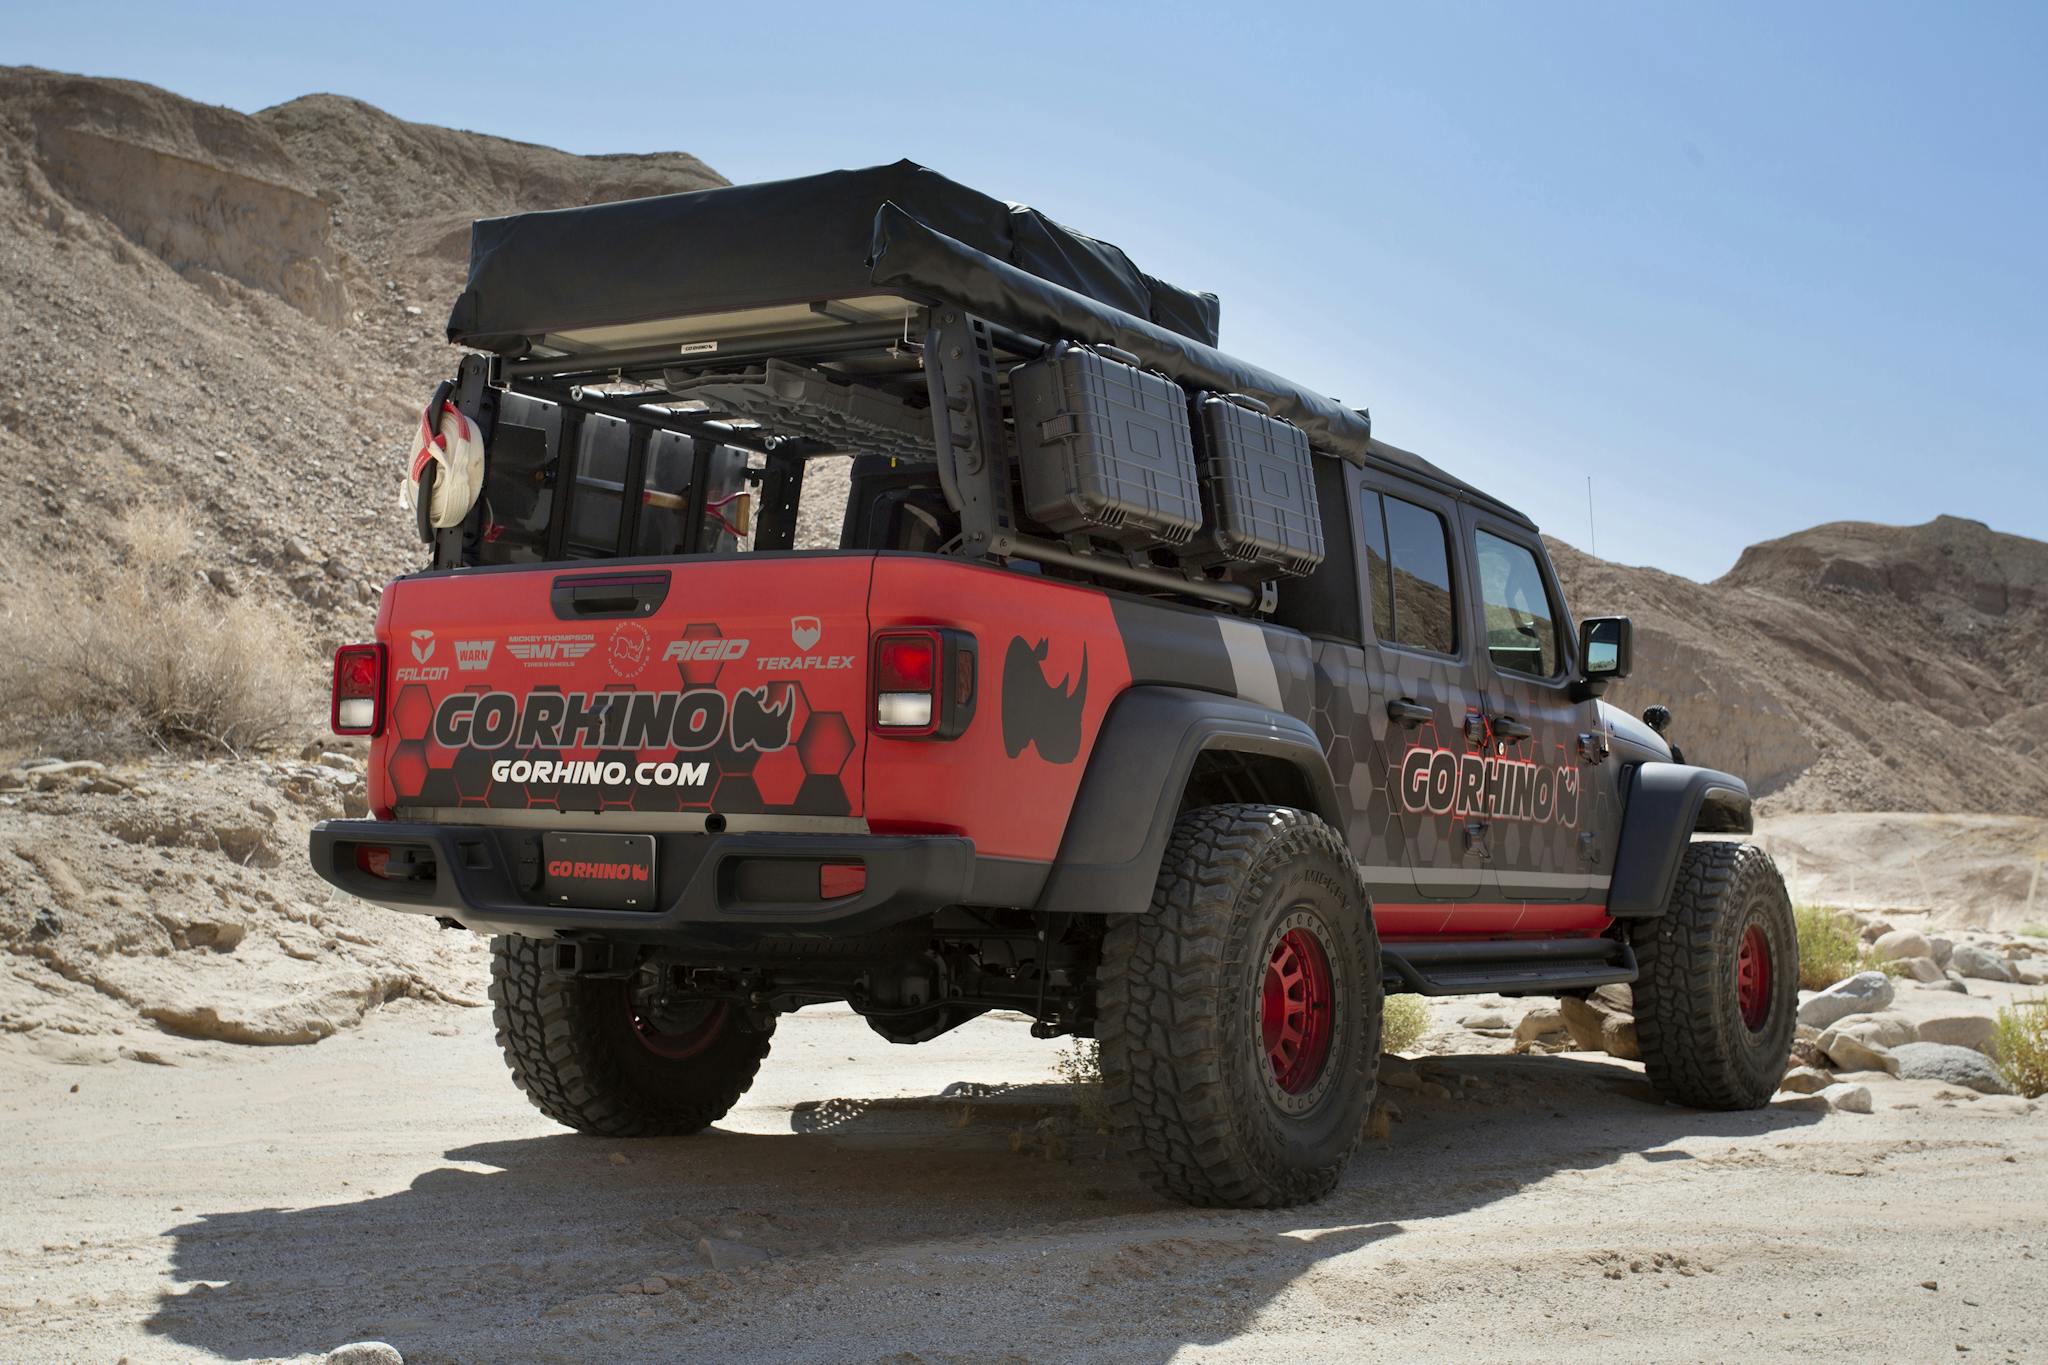 GoRhino branded accessories on a Jeep Gladiator in the desert